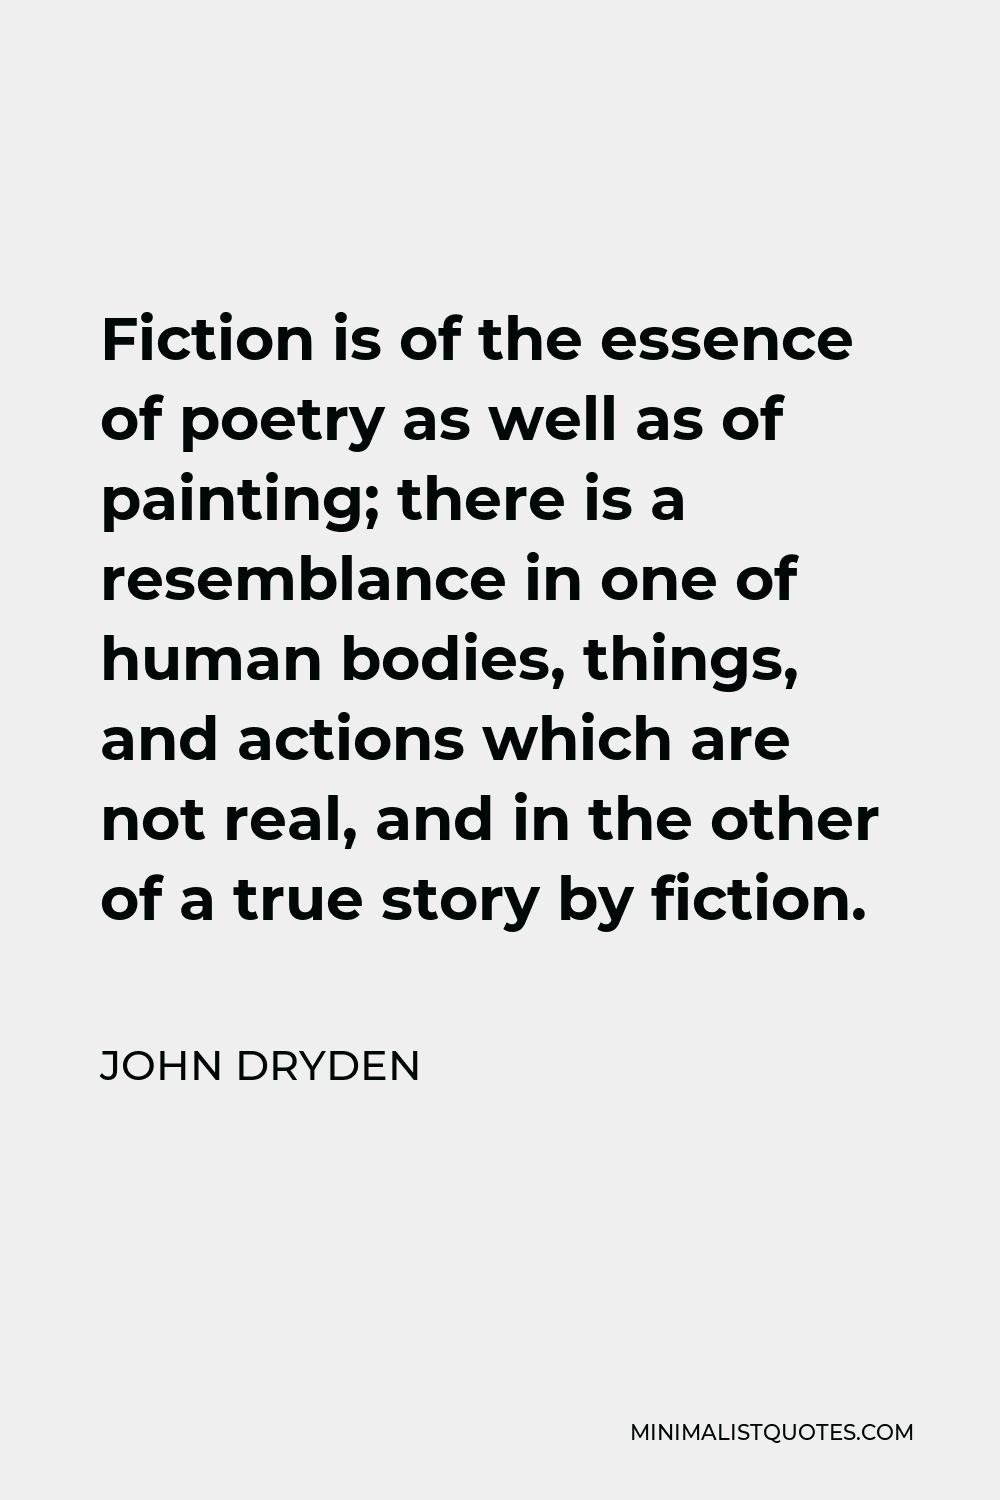 John Dryden Quote - Fiction is of the essence of poetry as well as of painting; there is a resemblance in one of human bodies, things, and actions which are not real, and in the other of a true story by fiction.